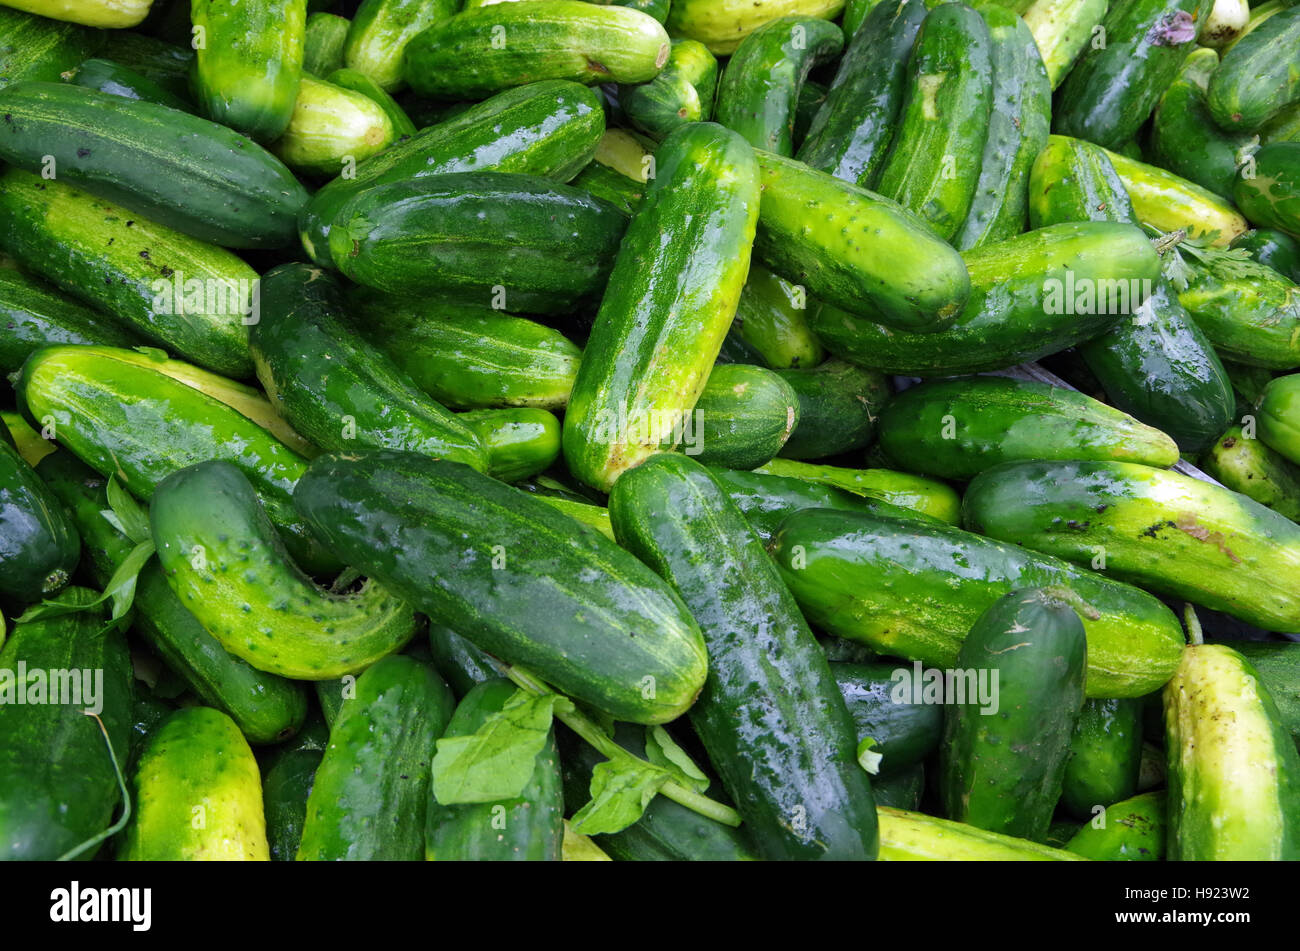 Farm fresh green pickling cucumbers piled for market Stock Photo